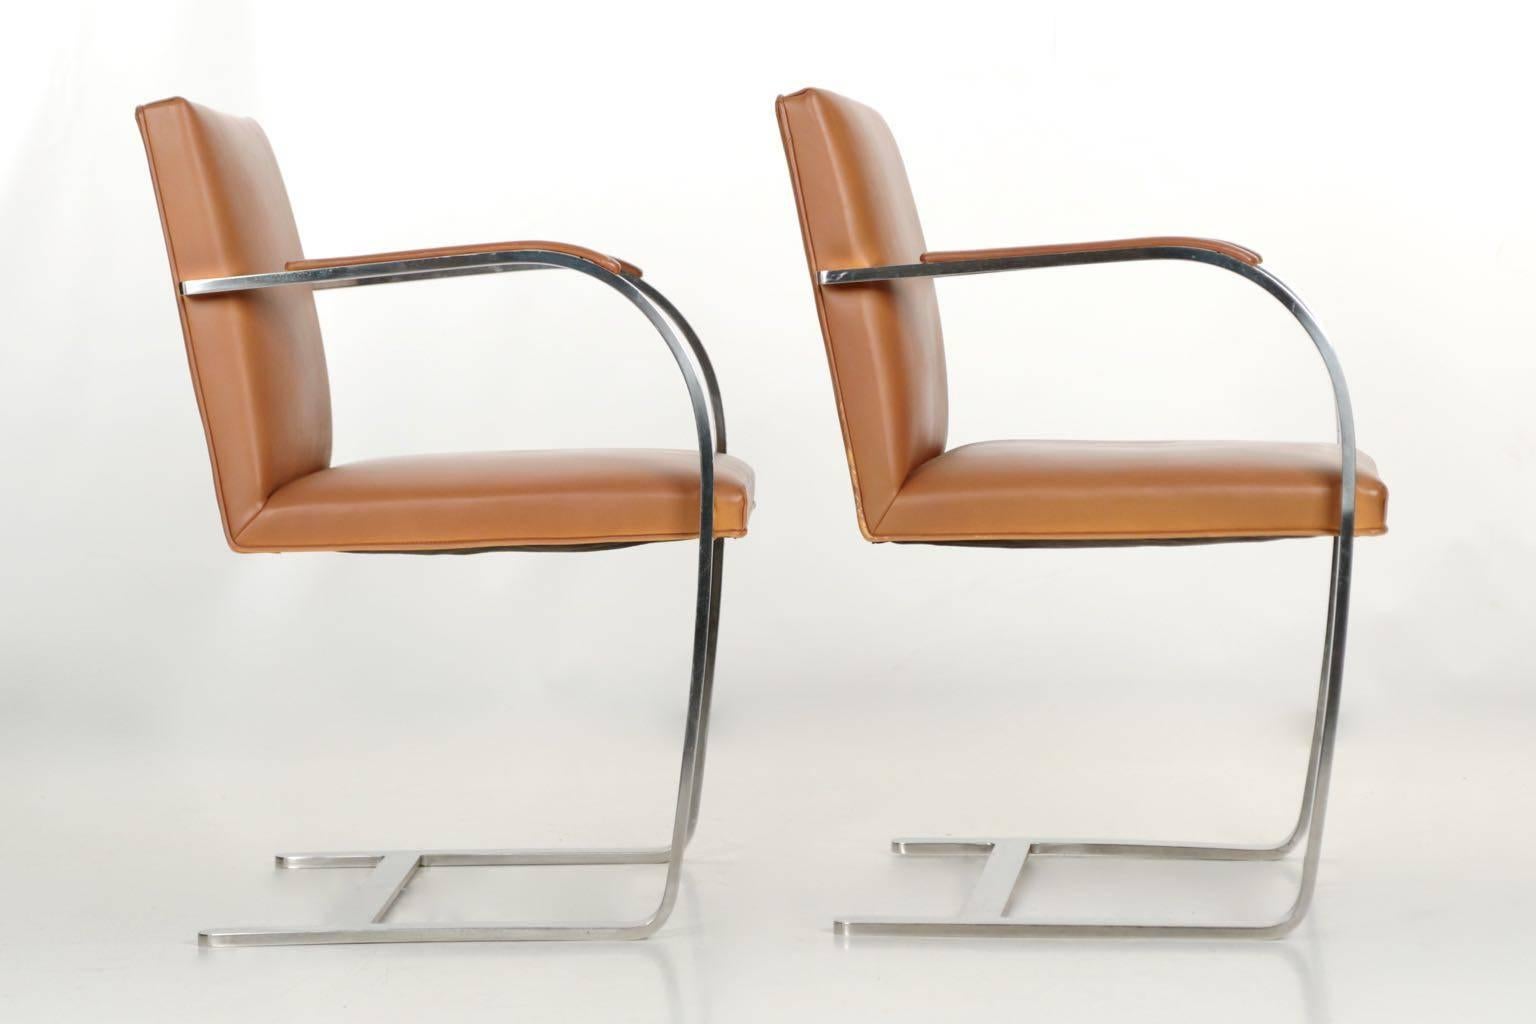 Stainless Steel Pair of Steel and Leather BRNO Arm Chairs by Mies Van Der Rohe for Knoll